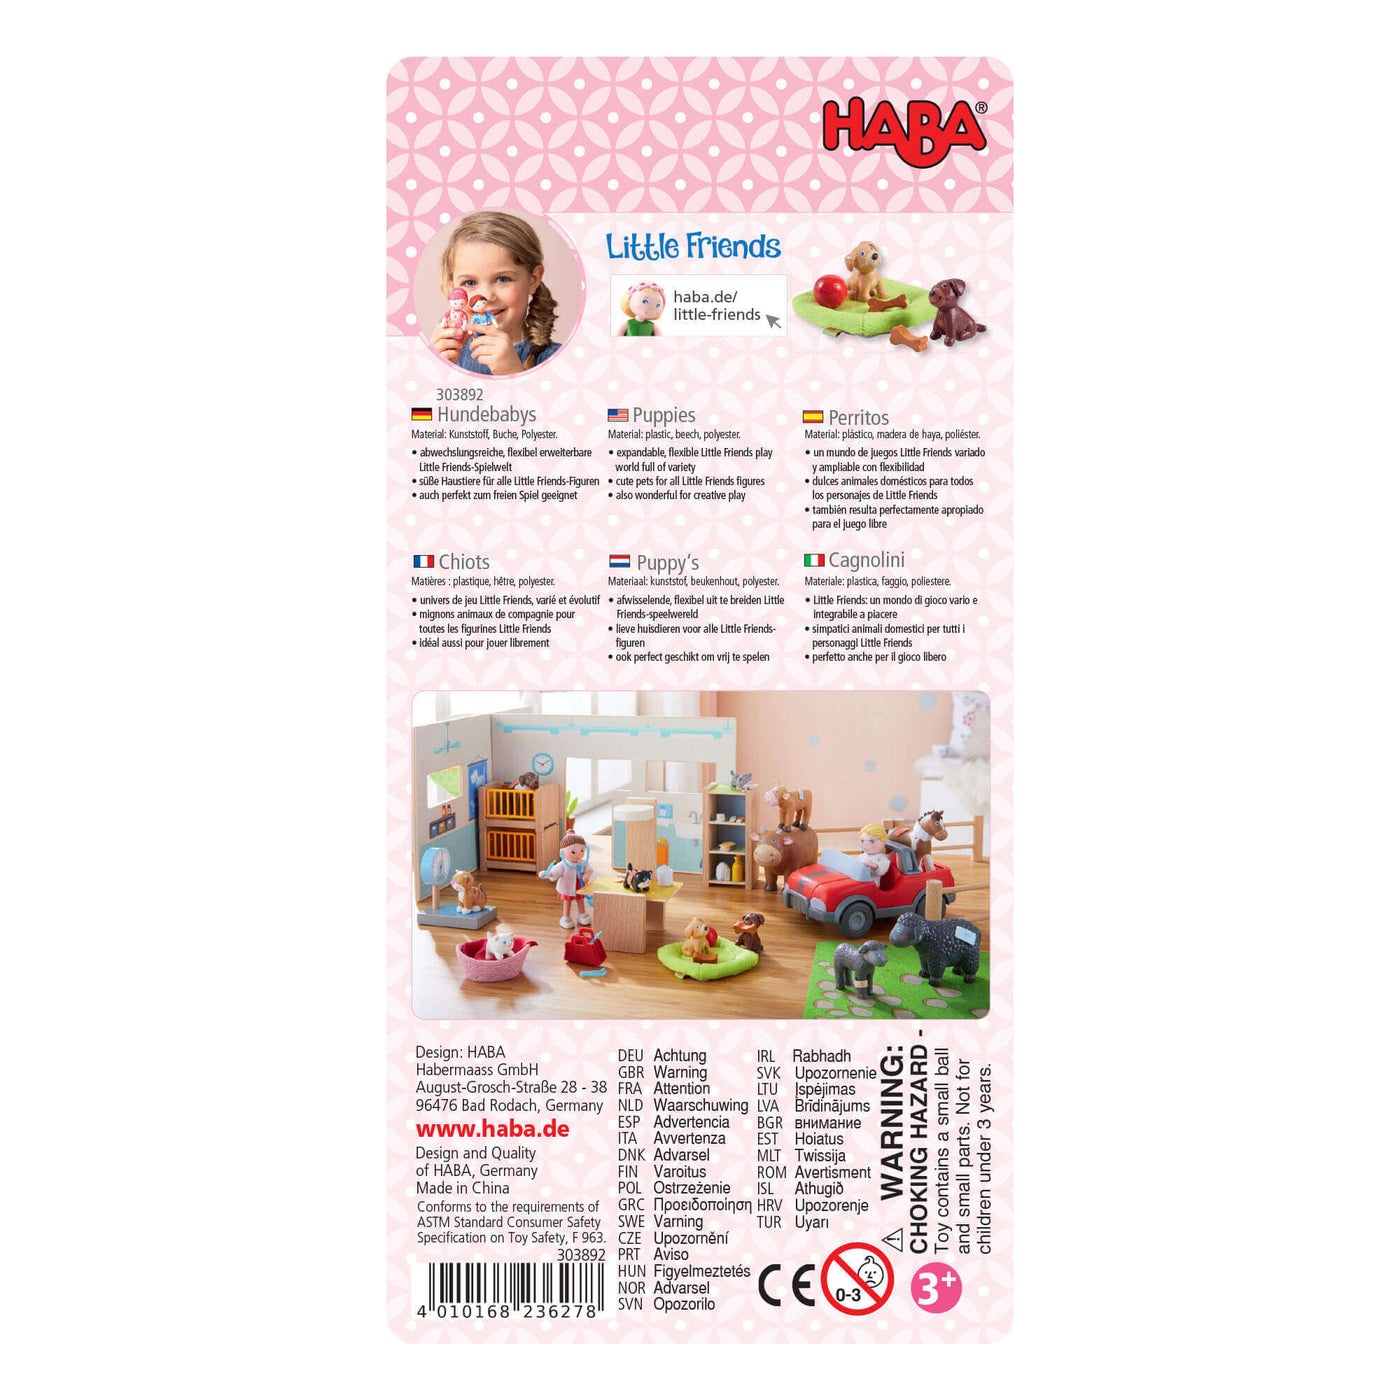 HABA Little Friends Puppy Love Playset back of packaging